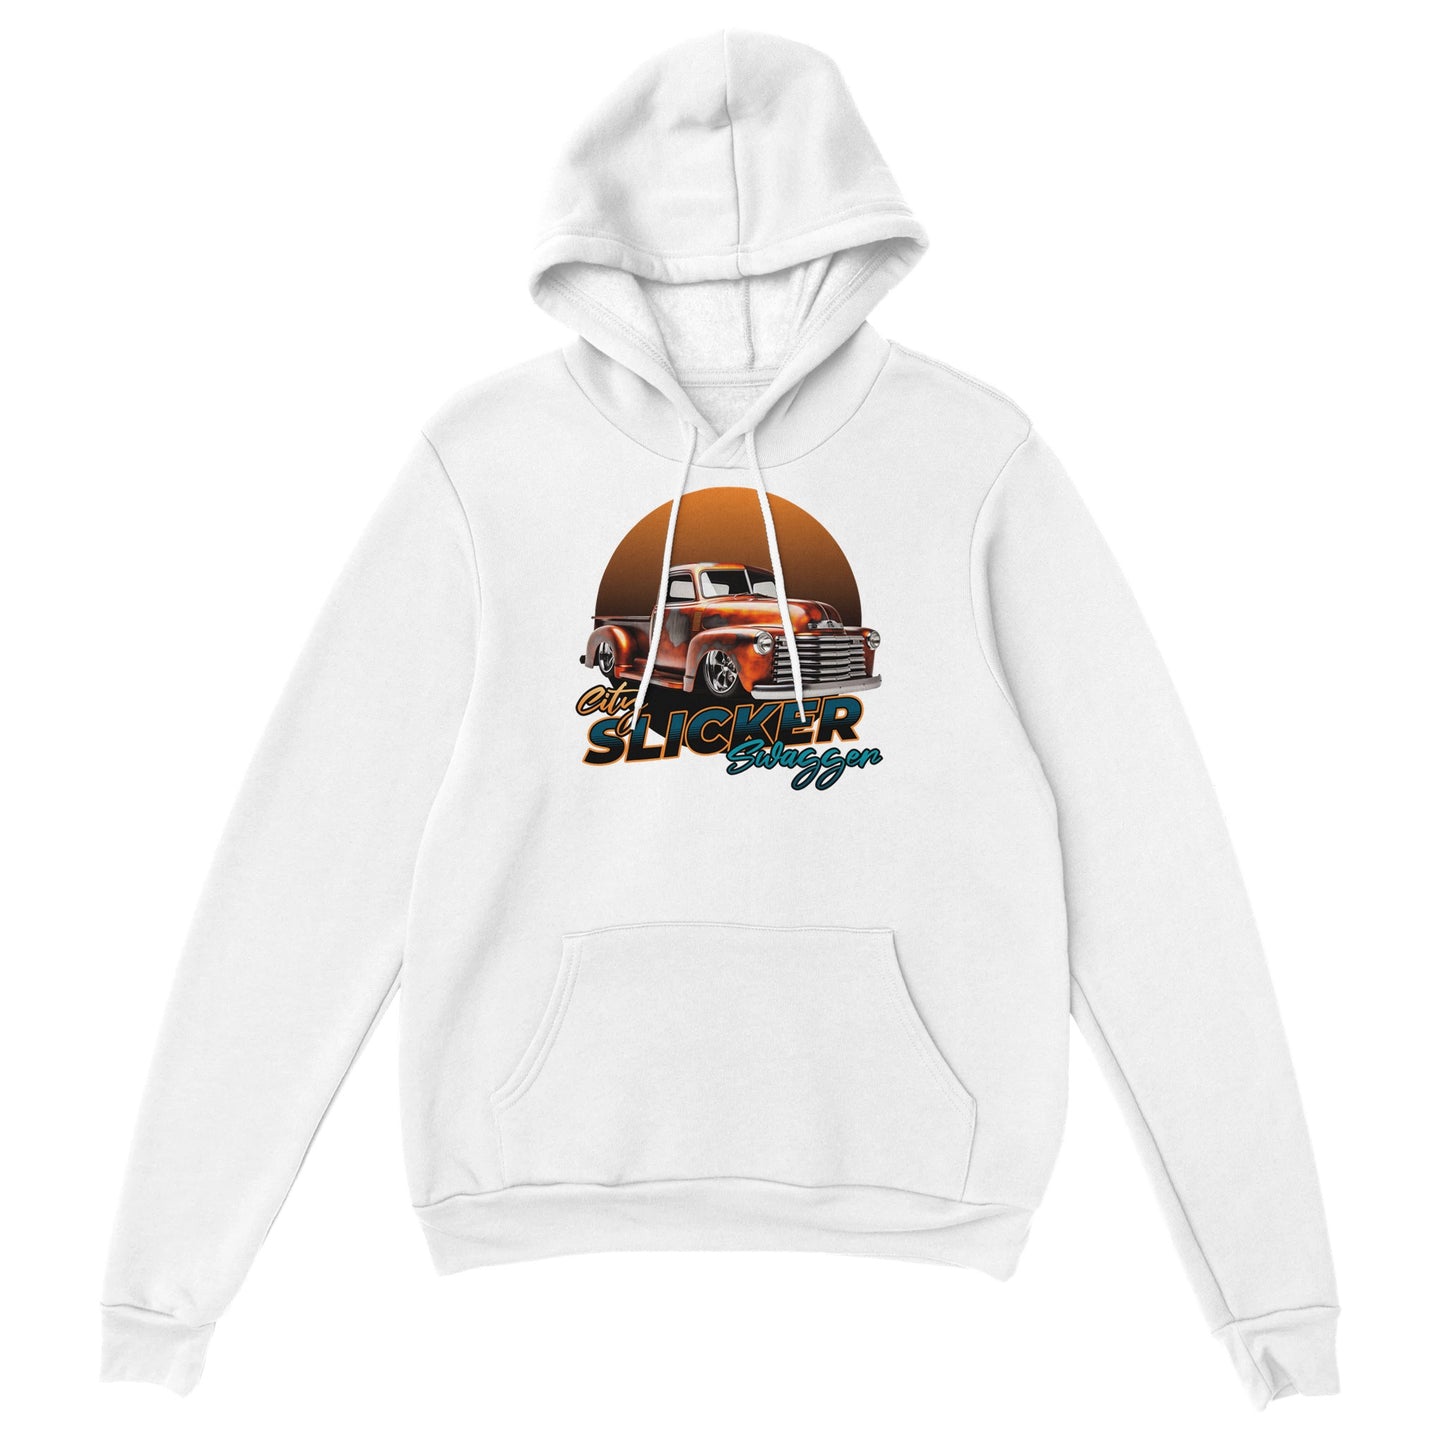 Classic Chevy 3100 Pickup Pullover Hoodie - Mister Snarky's